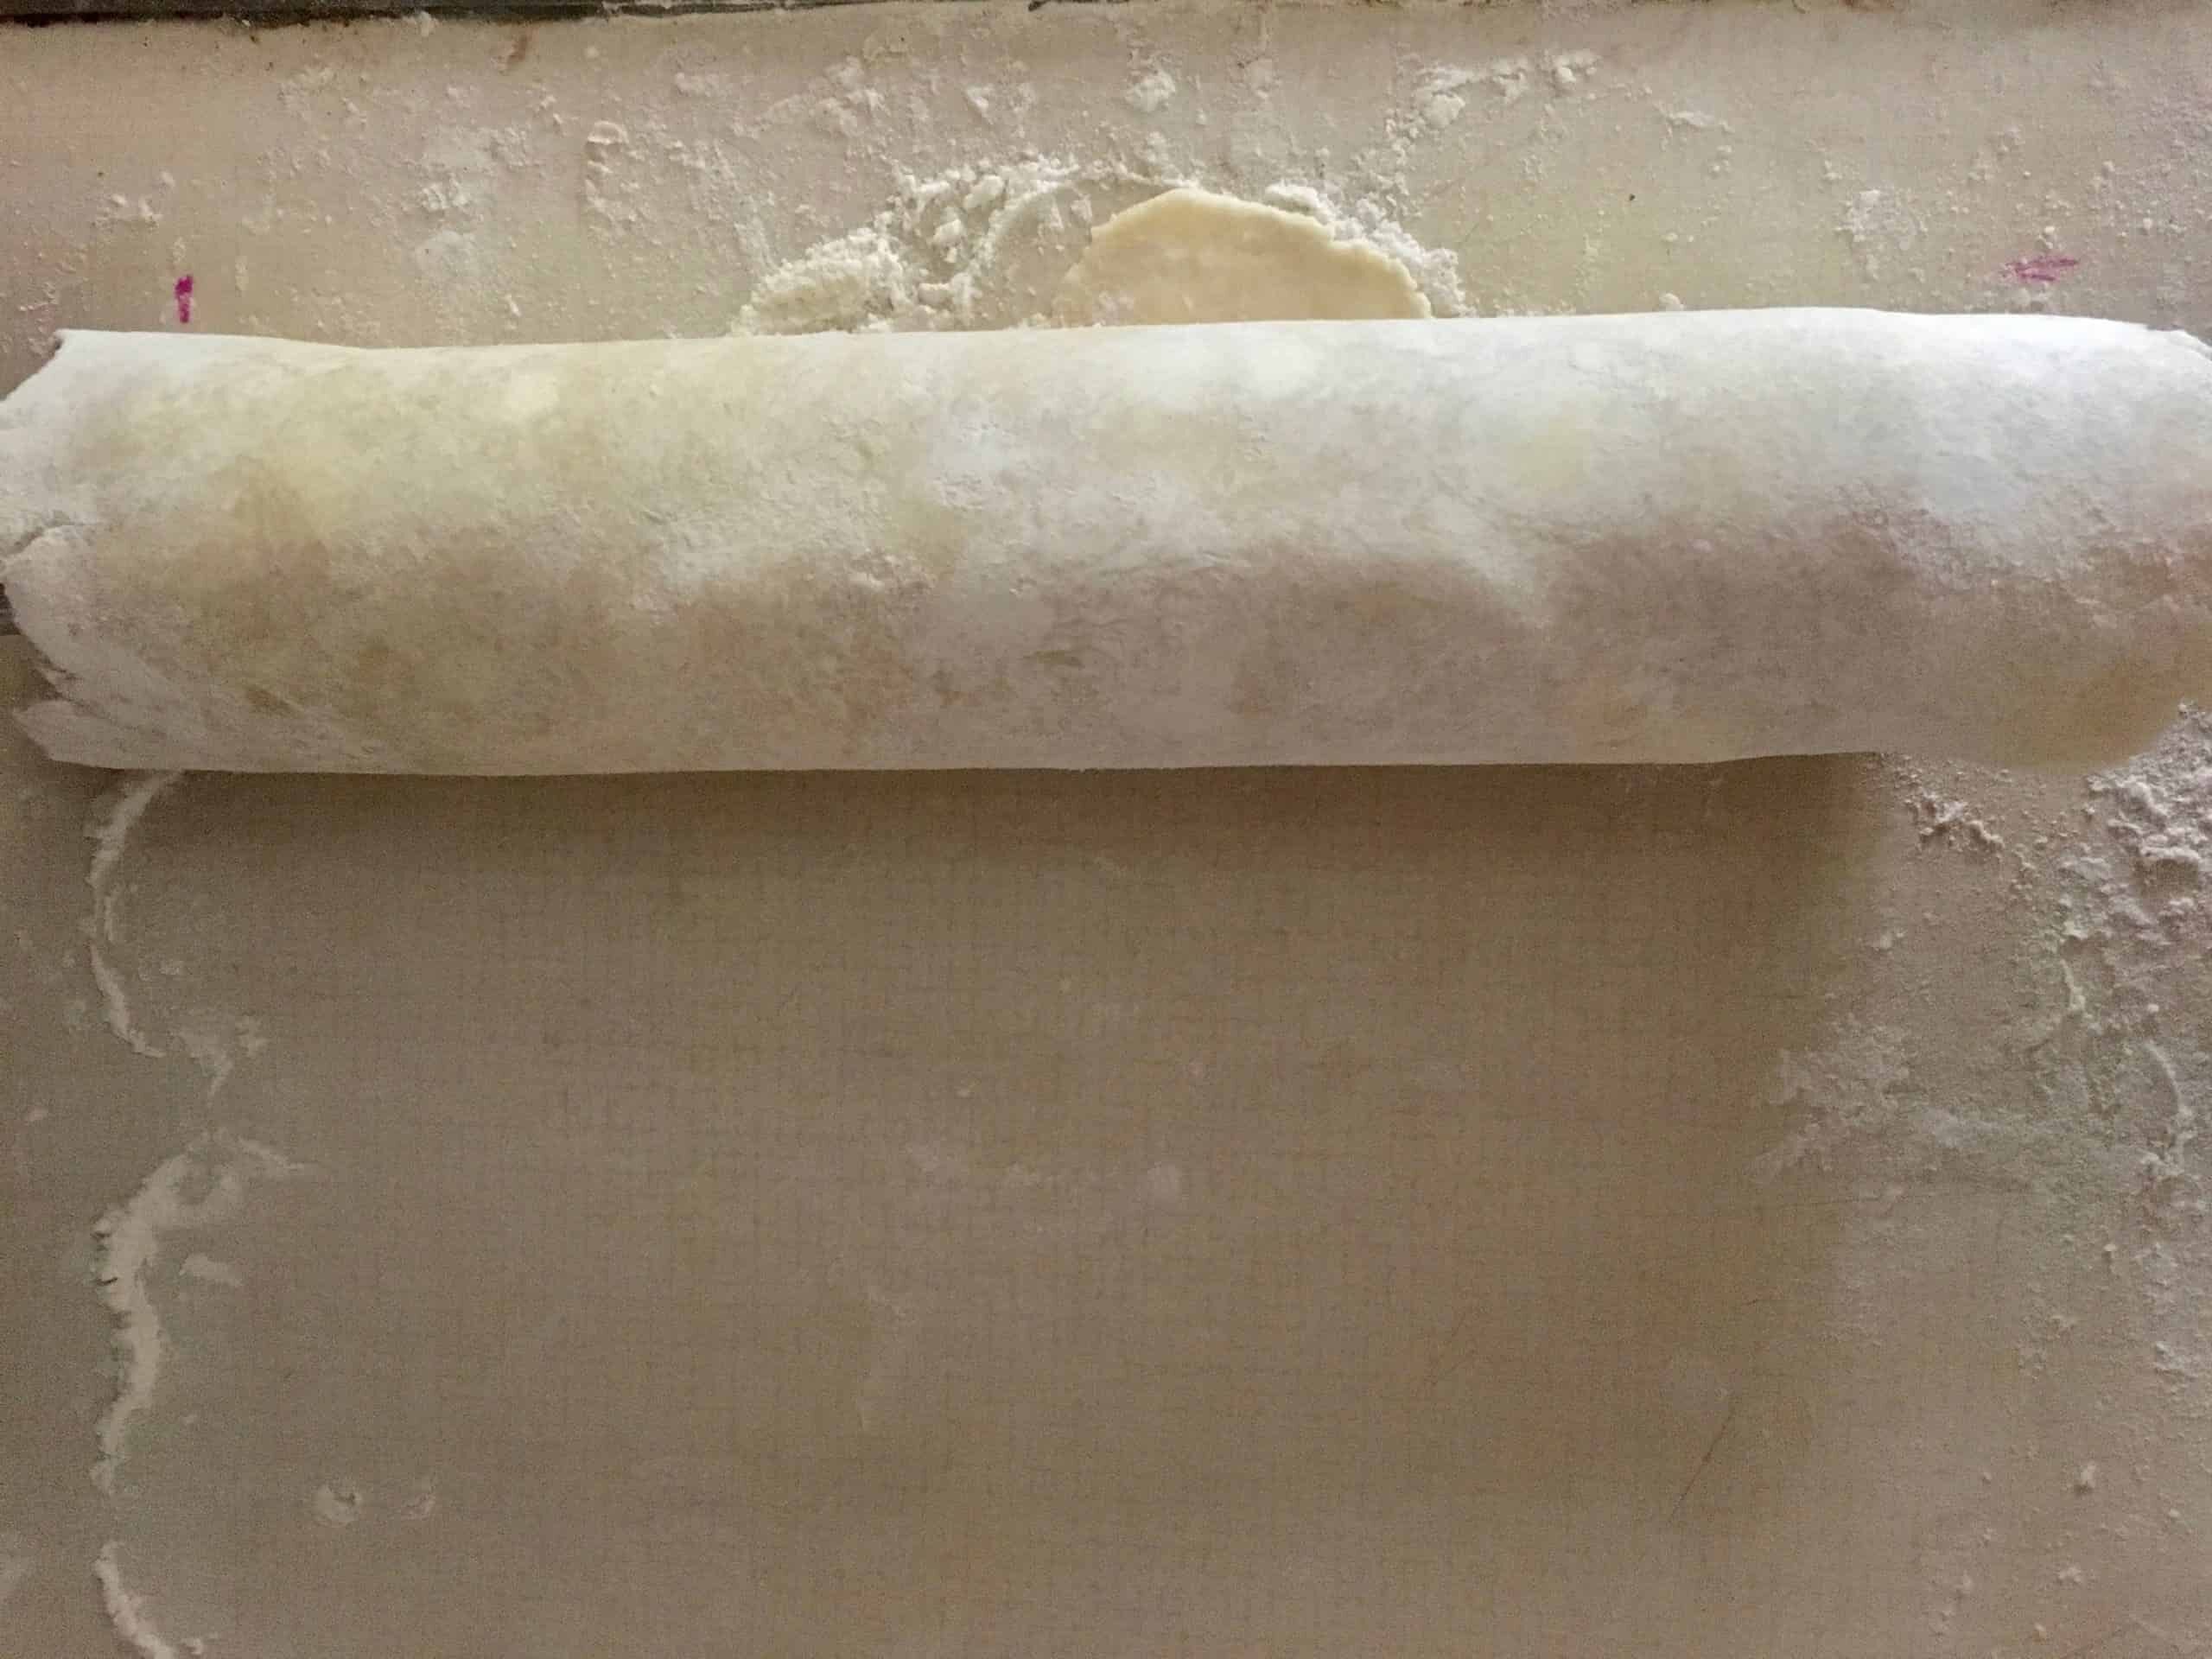 rolled out pie dough rolled completely up onto the rolling pin to easily transport it to the pie plate